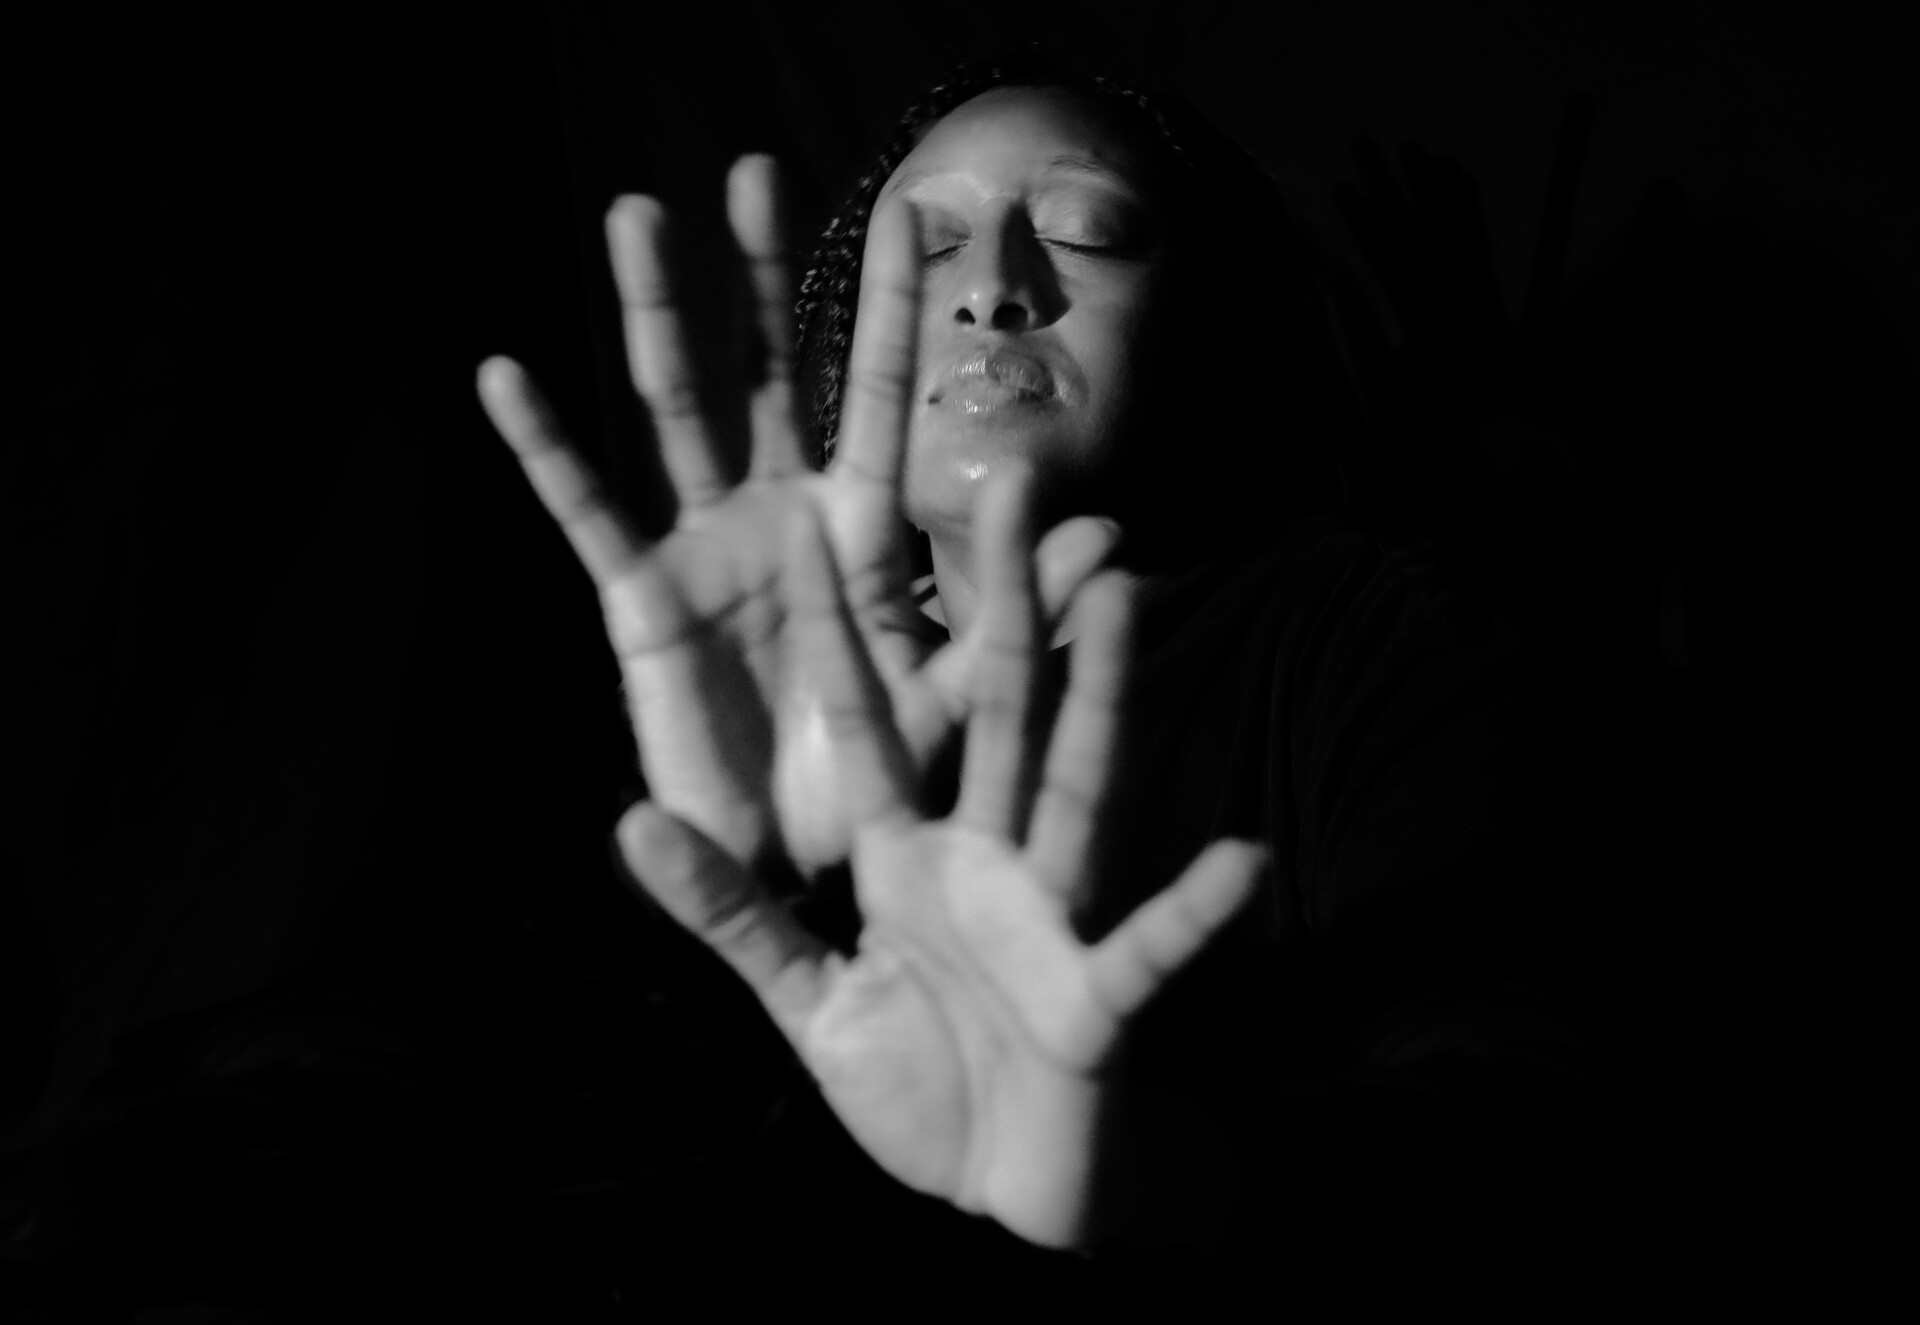 Black and white photograph of a woman with her eyes closed and her hands out in front of her enclosed by a black background.